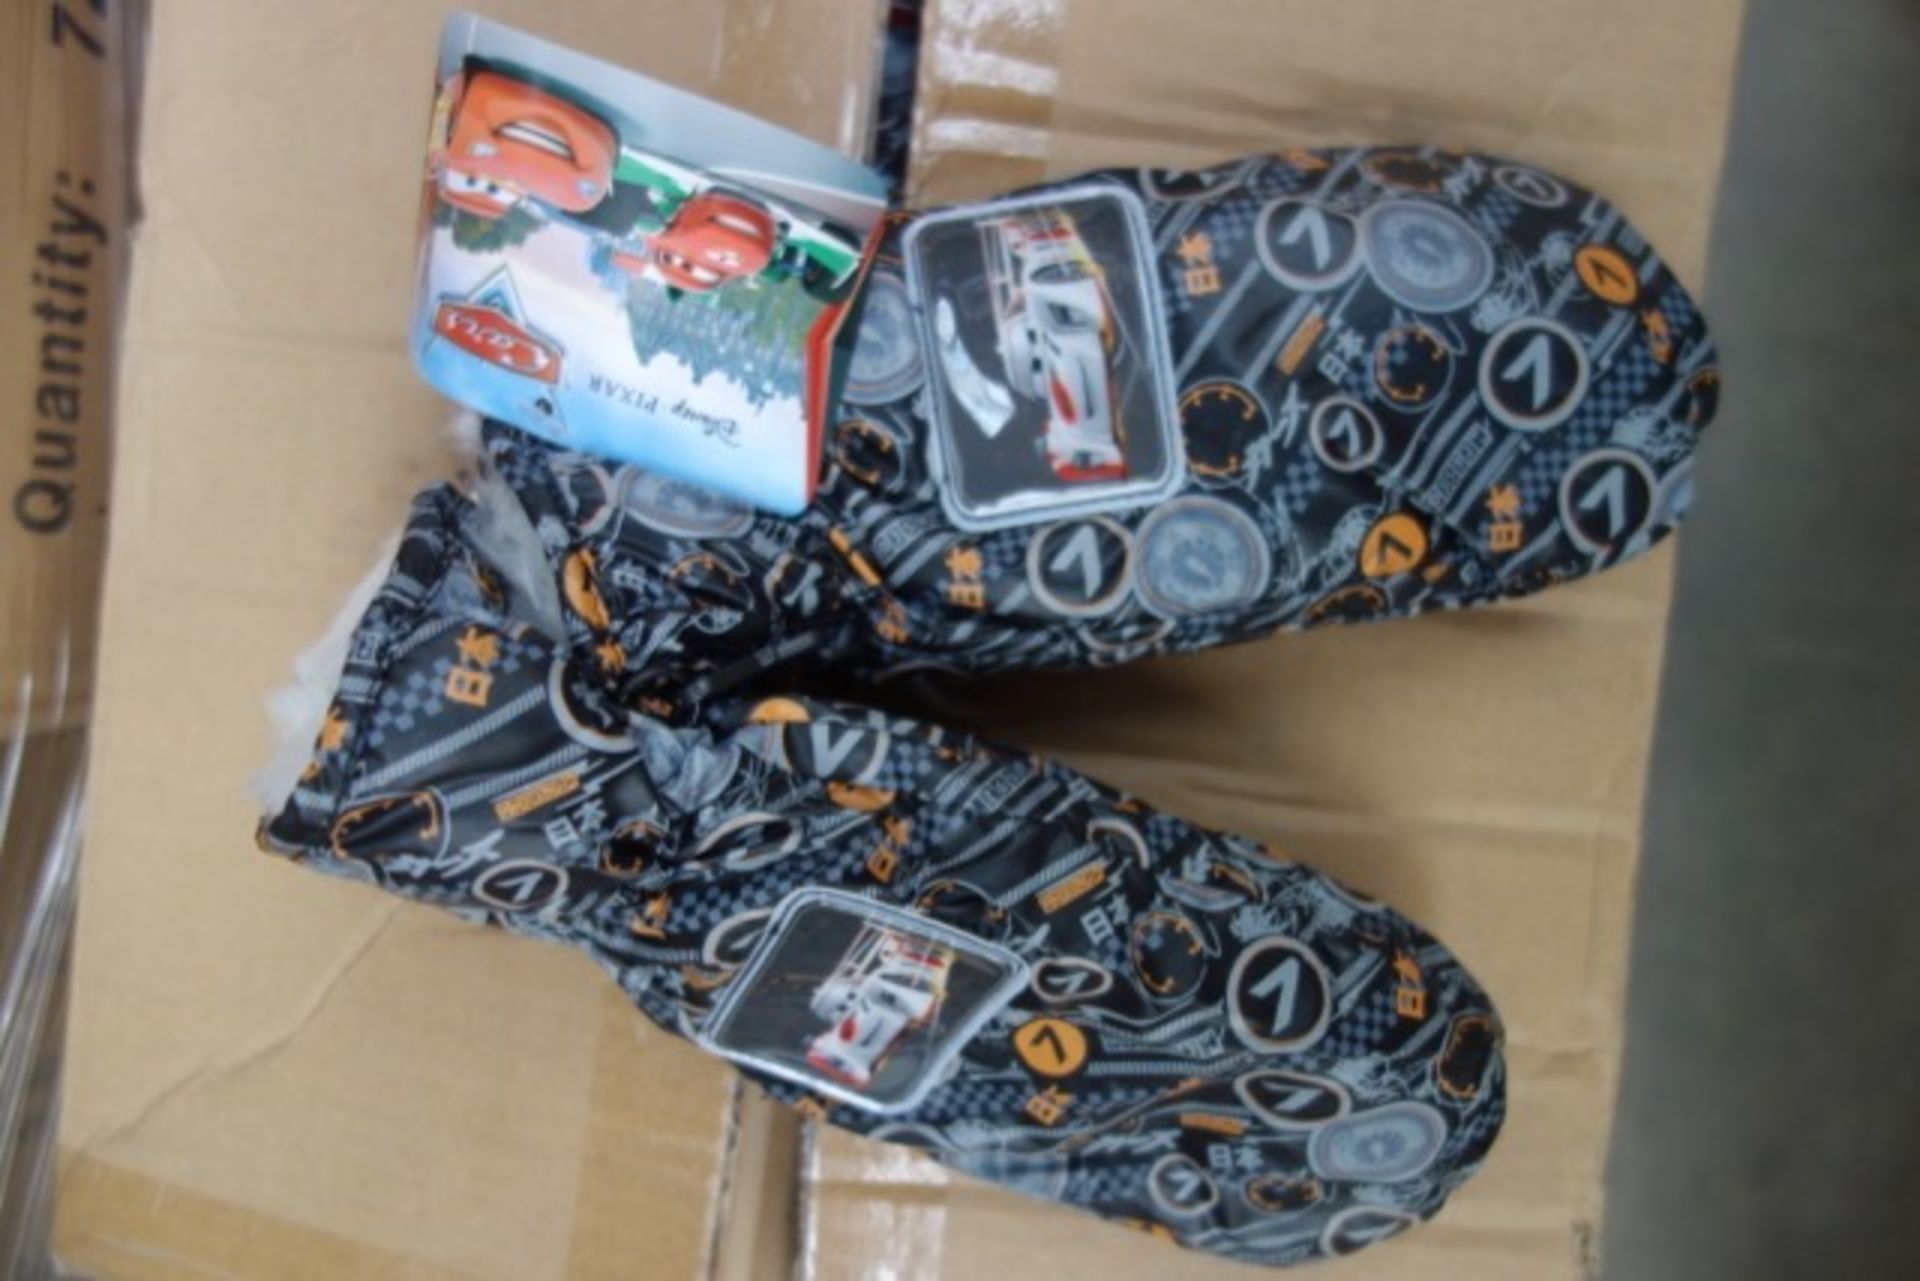 72 x Pairs of Disney Pixar Cars Fleece Lined Mittens. RRP £6.99 per pair, giving this lot a total - Image 2 of 2